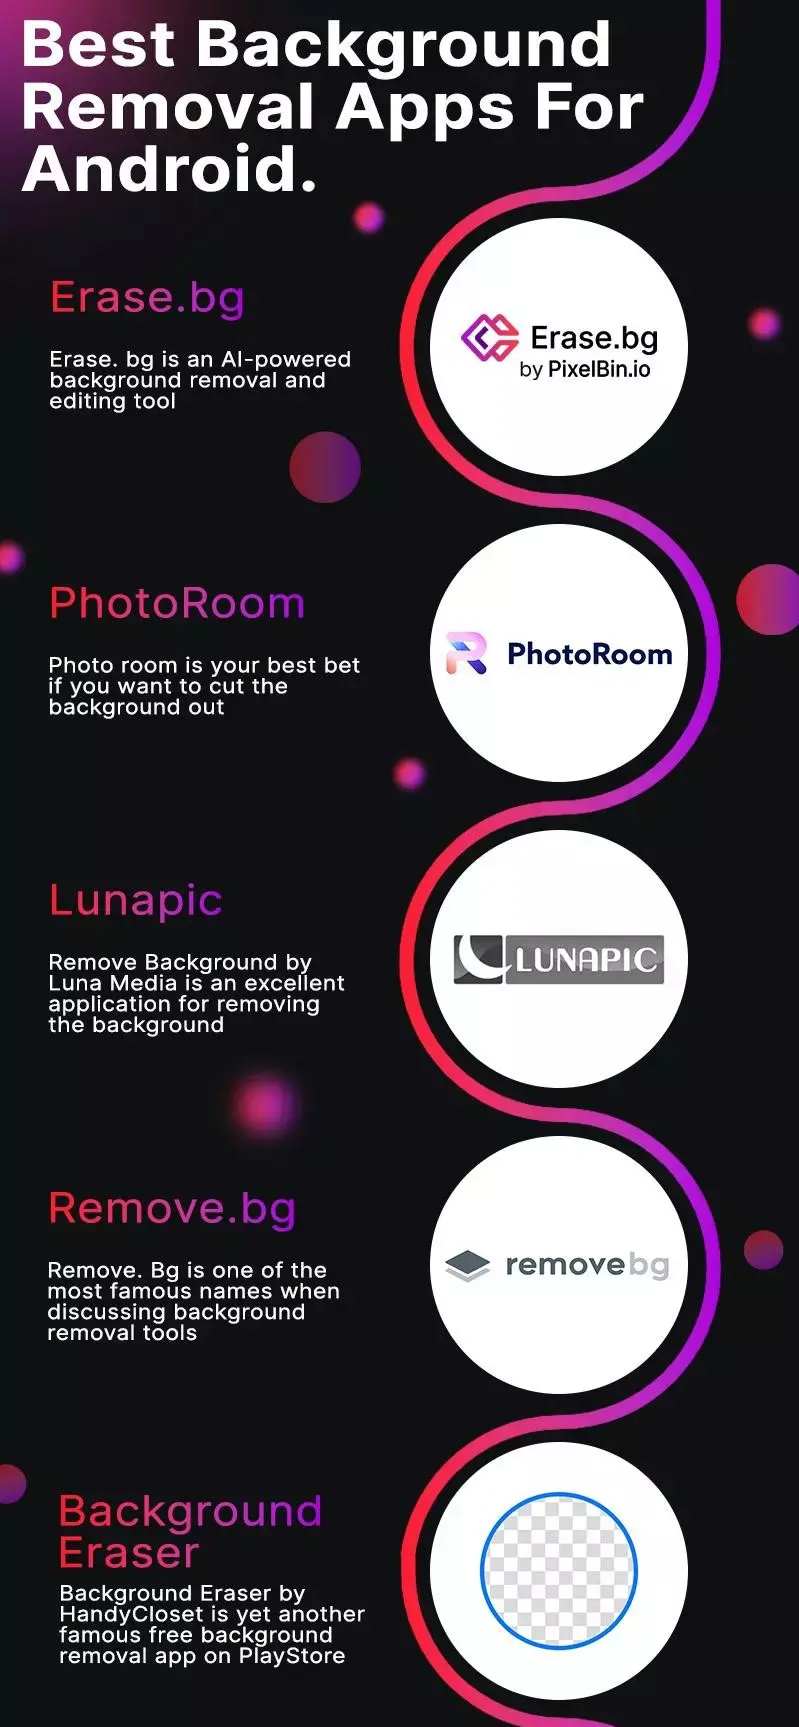 Best Background Removal Apps